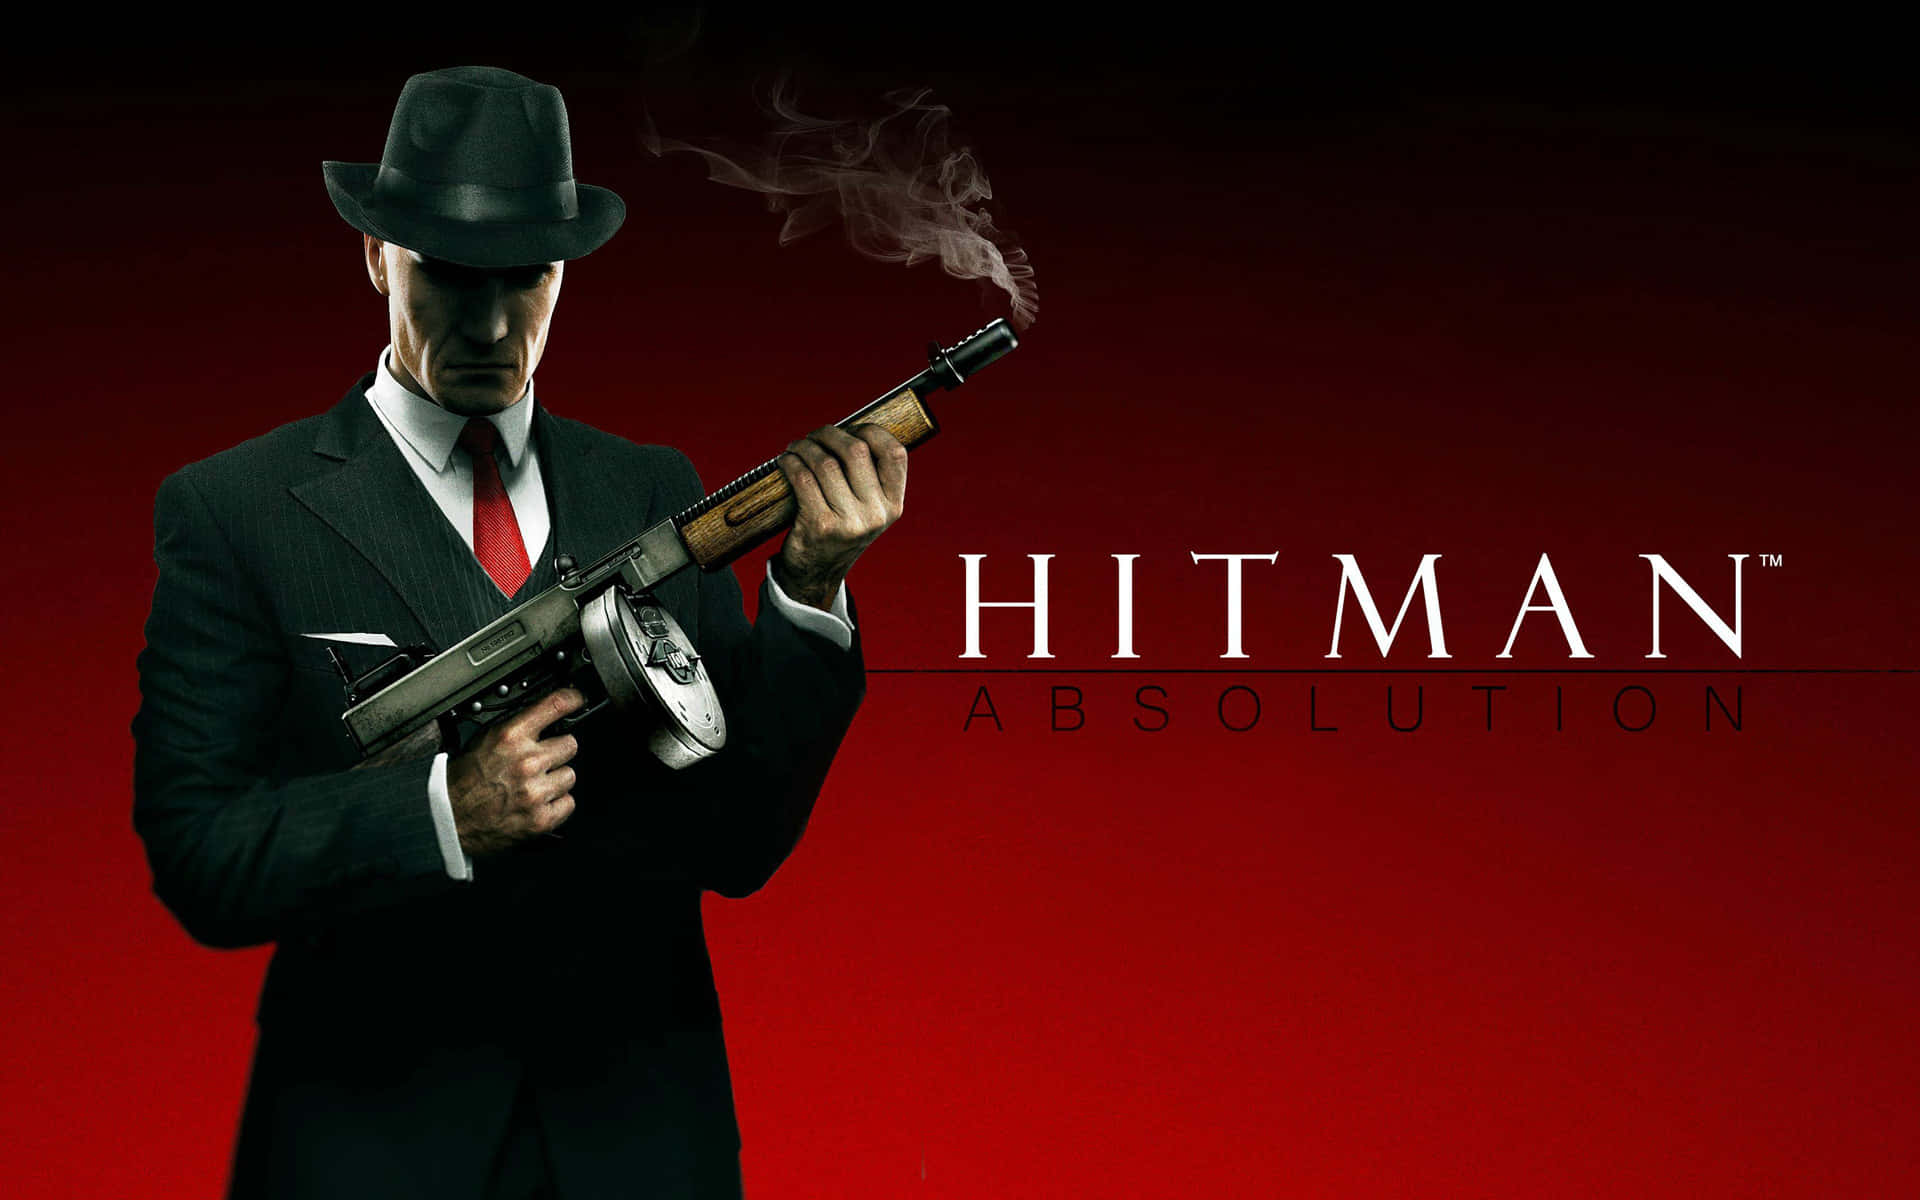 Hitman Absolution – The Lethal Stealth Game